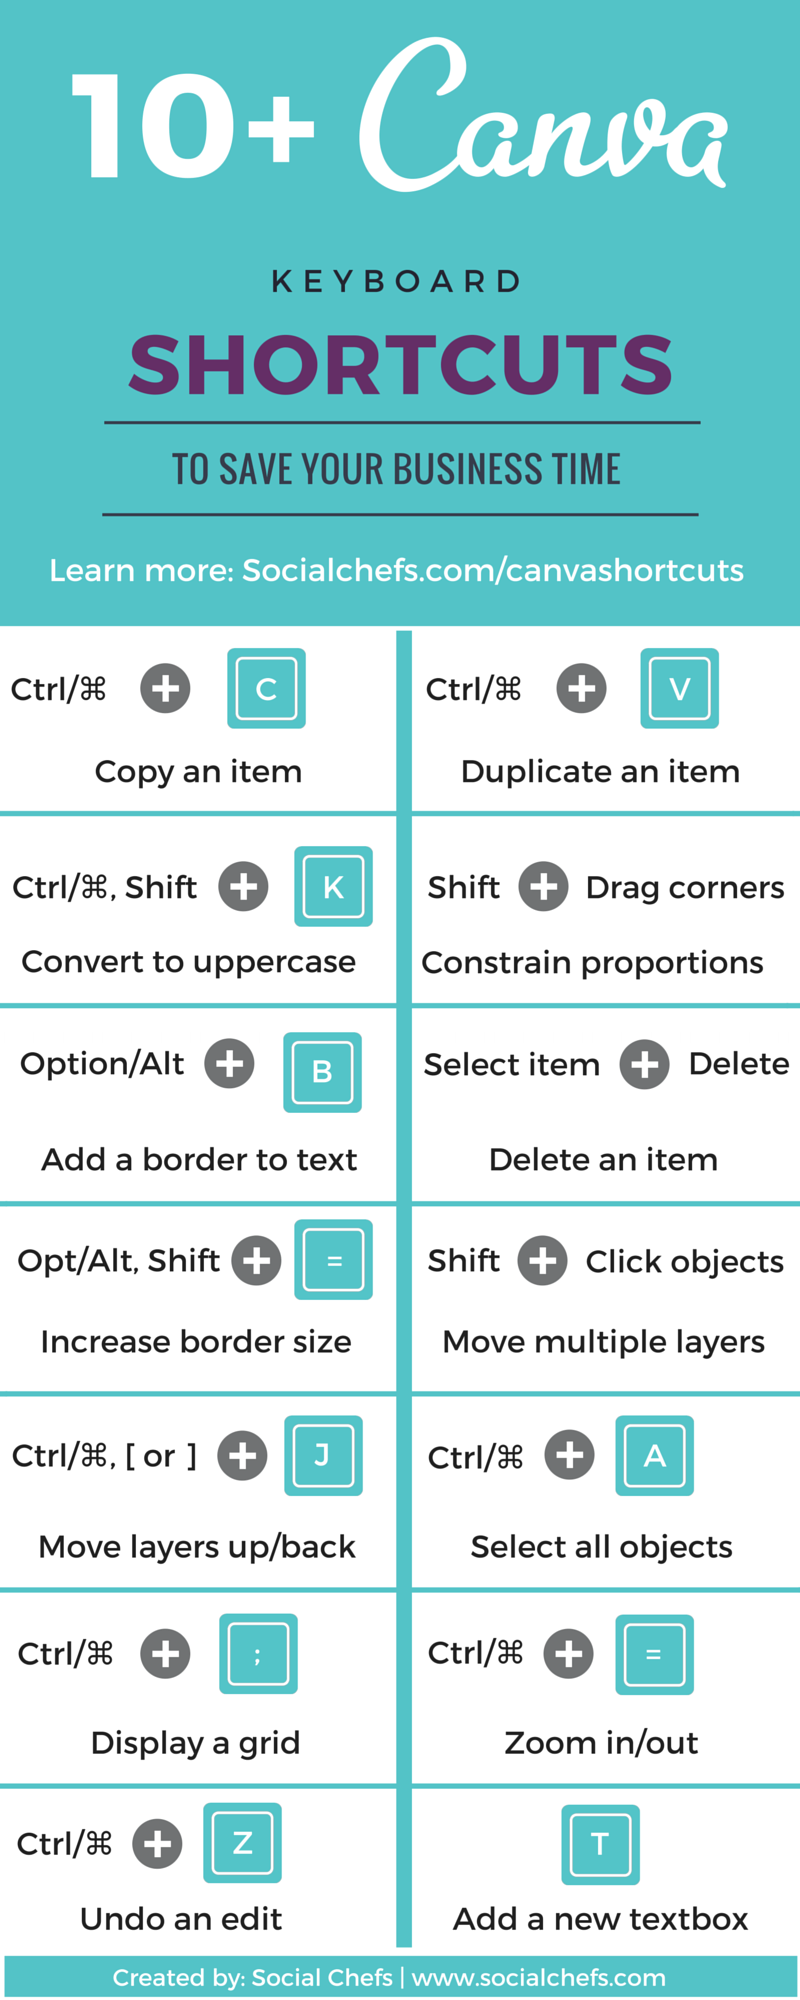 canva-keyboard-shortcuts-infographic-social-chefs